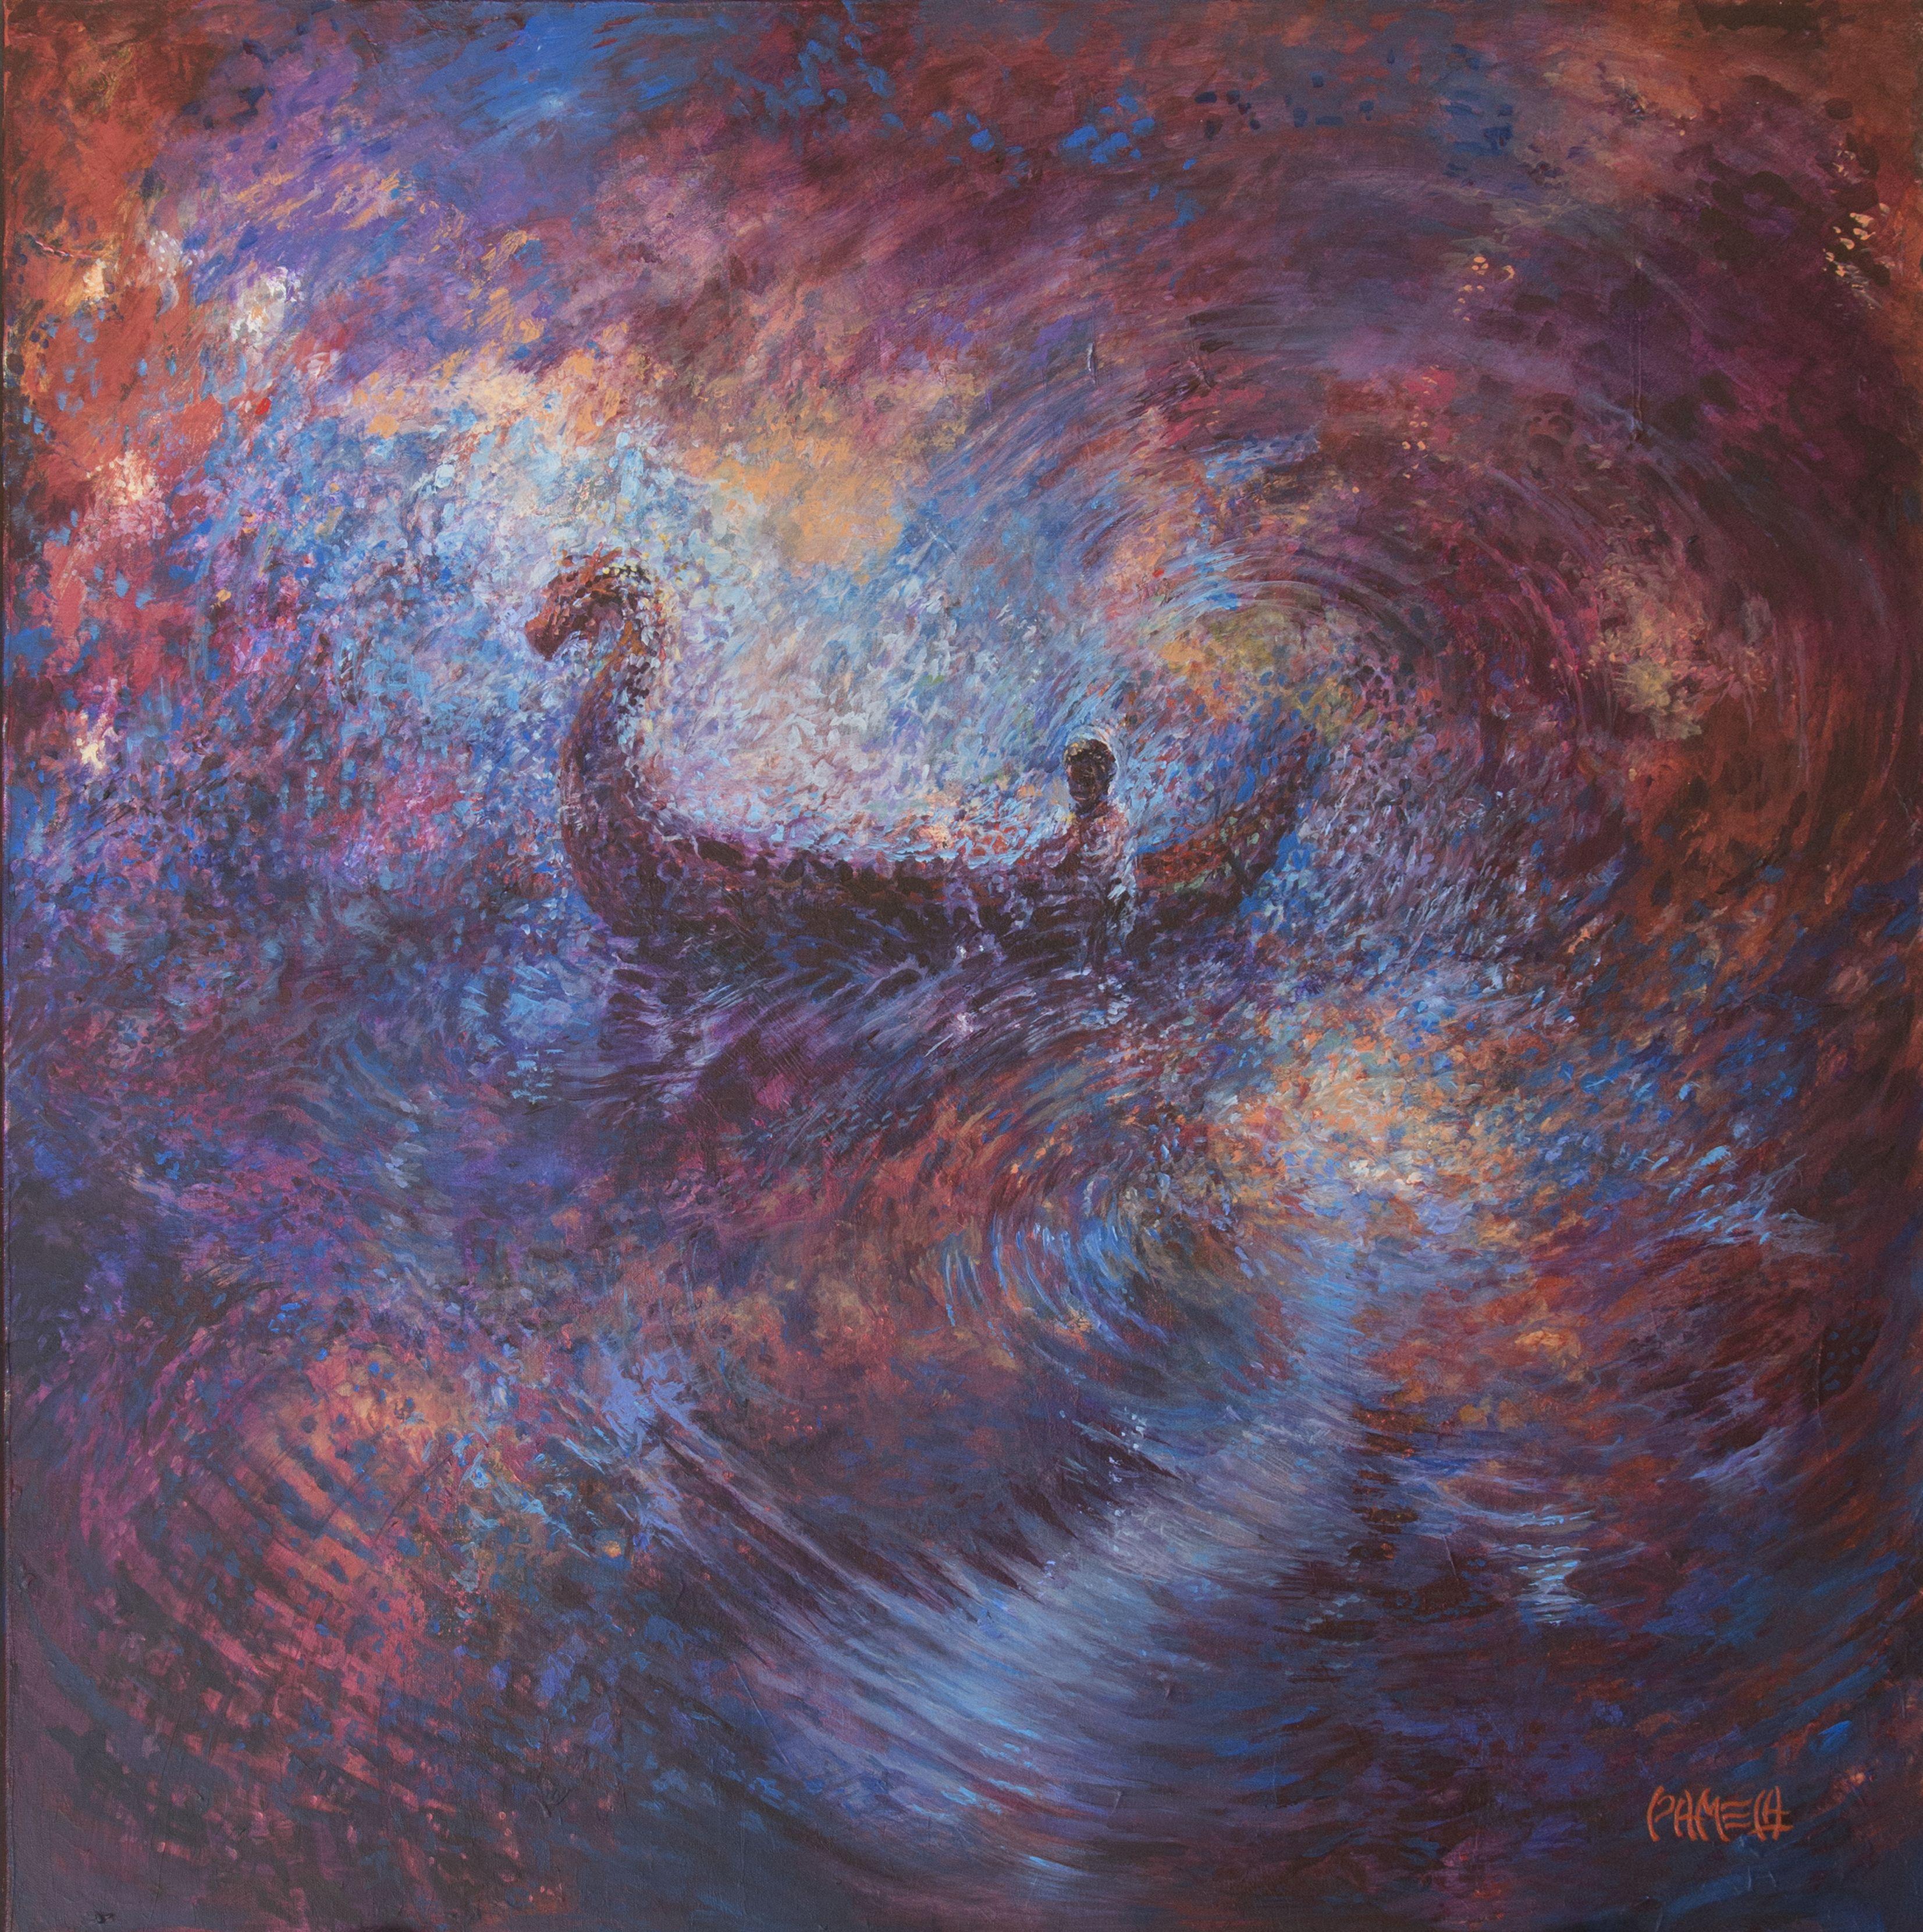 OBADIA CROSSING THE RIVER STYX, by Pamela Boullier Ross, speaks to the artist's intuitive and metaphysical approach to a canvas in this distinctly one-of-a-kind original masterpiece.   "Intuitive Painting is painting with great trust in a level of